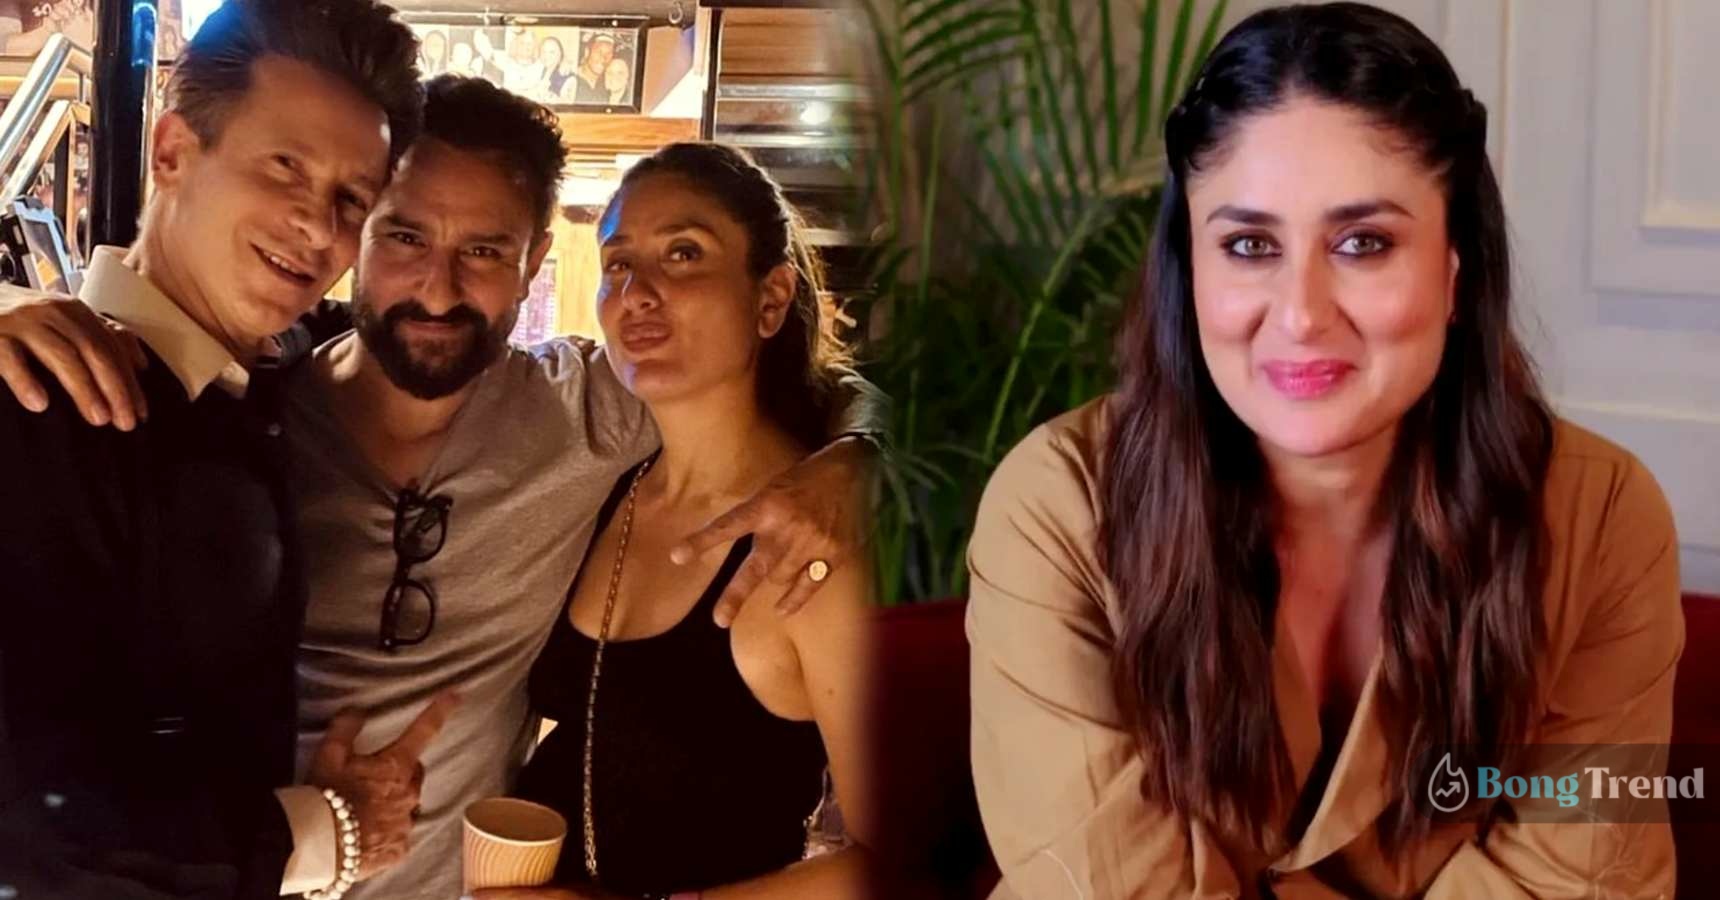 Kareena Kapoor opens up first time after pregnency rumours